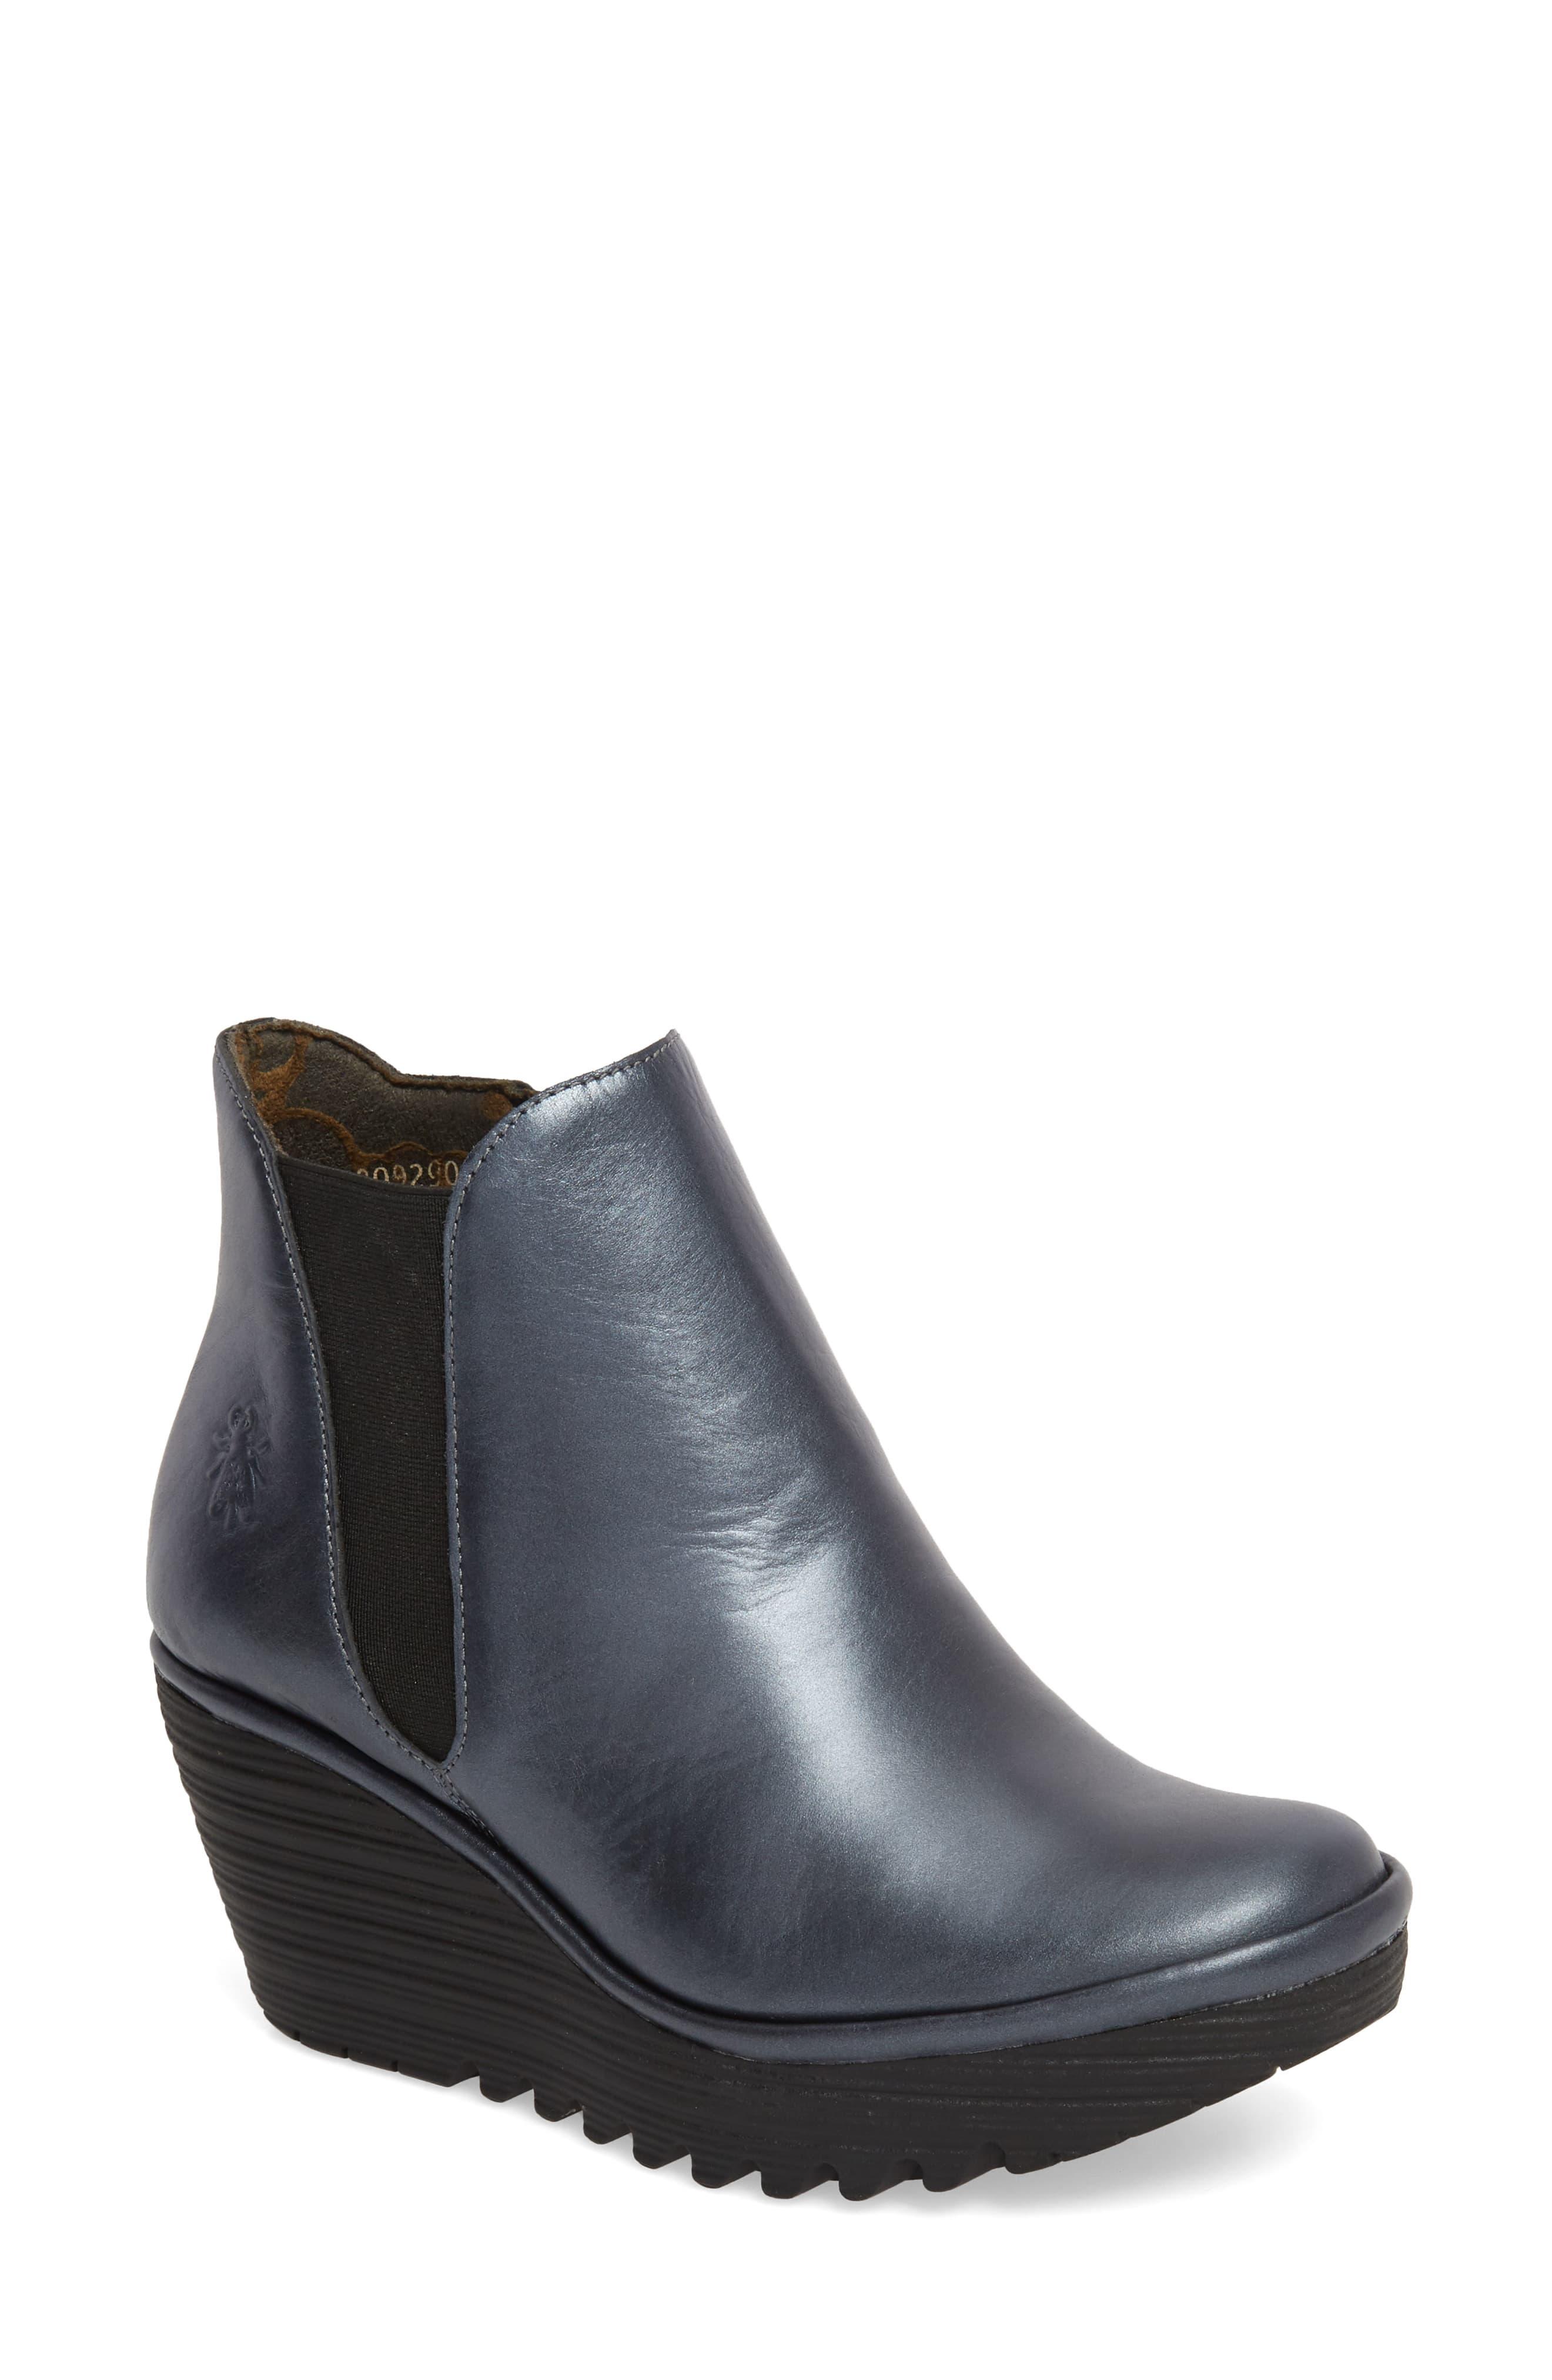 Fly London Yozo Wedge Boot in Graphite 